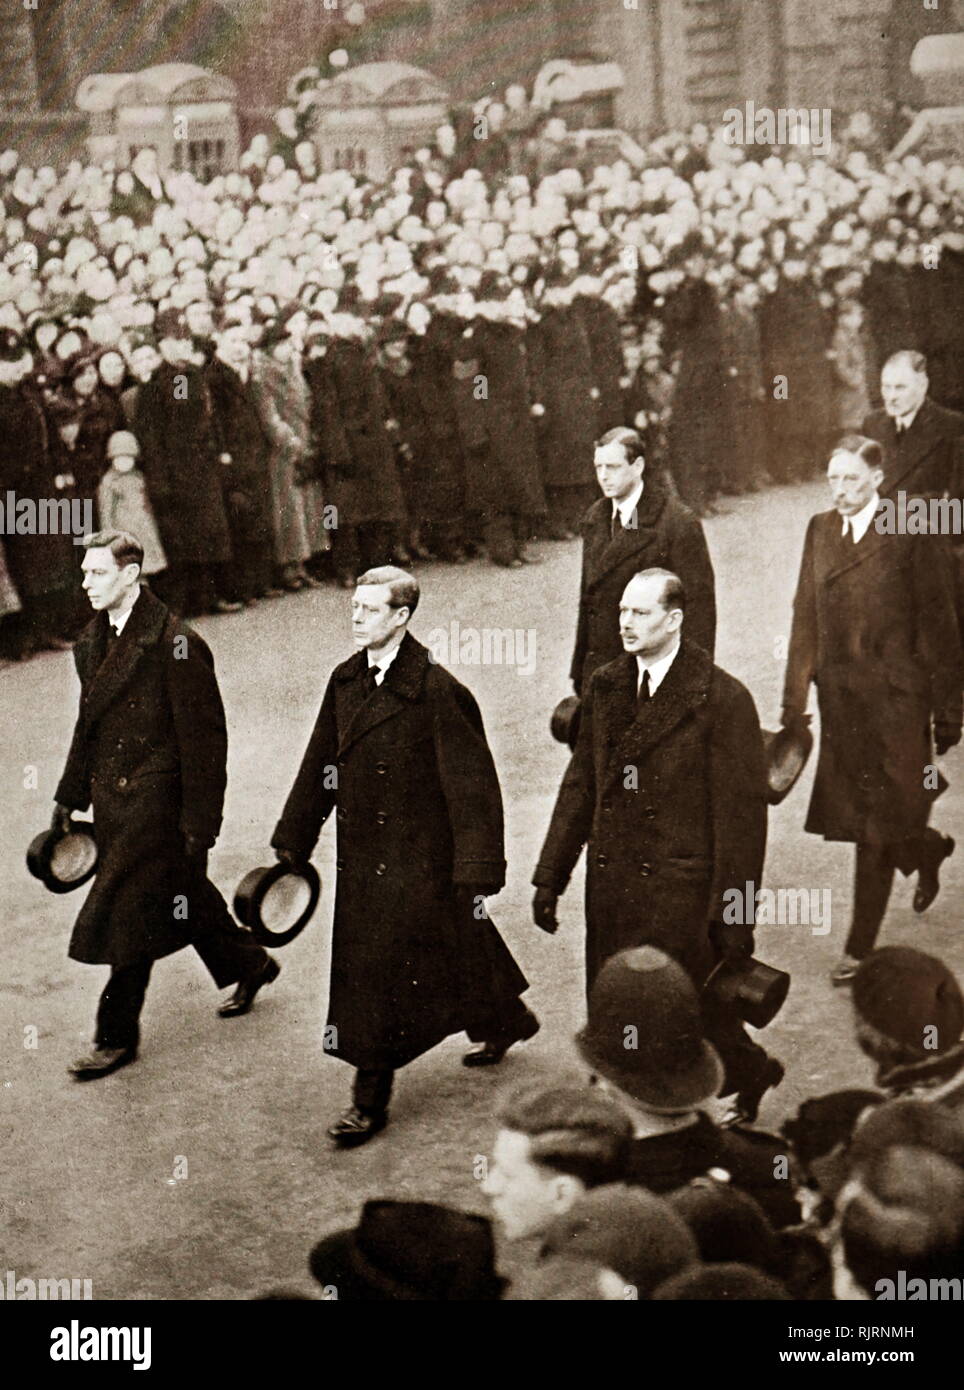 Funeral of King George V (1936); King of the United Kingdom and the British Dominions, and Emperor of India, from 6 May 1910 until his death in 1936. the four sons of the late king (King Edward VIII, the Duke of York, the Duke of Gloucester and the Duke of Kent) take part in the state funeral. Stock Photo